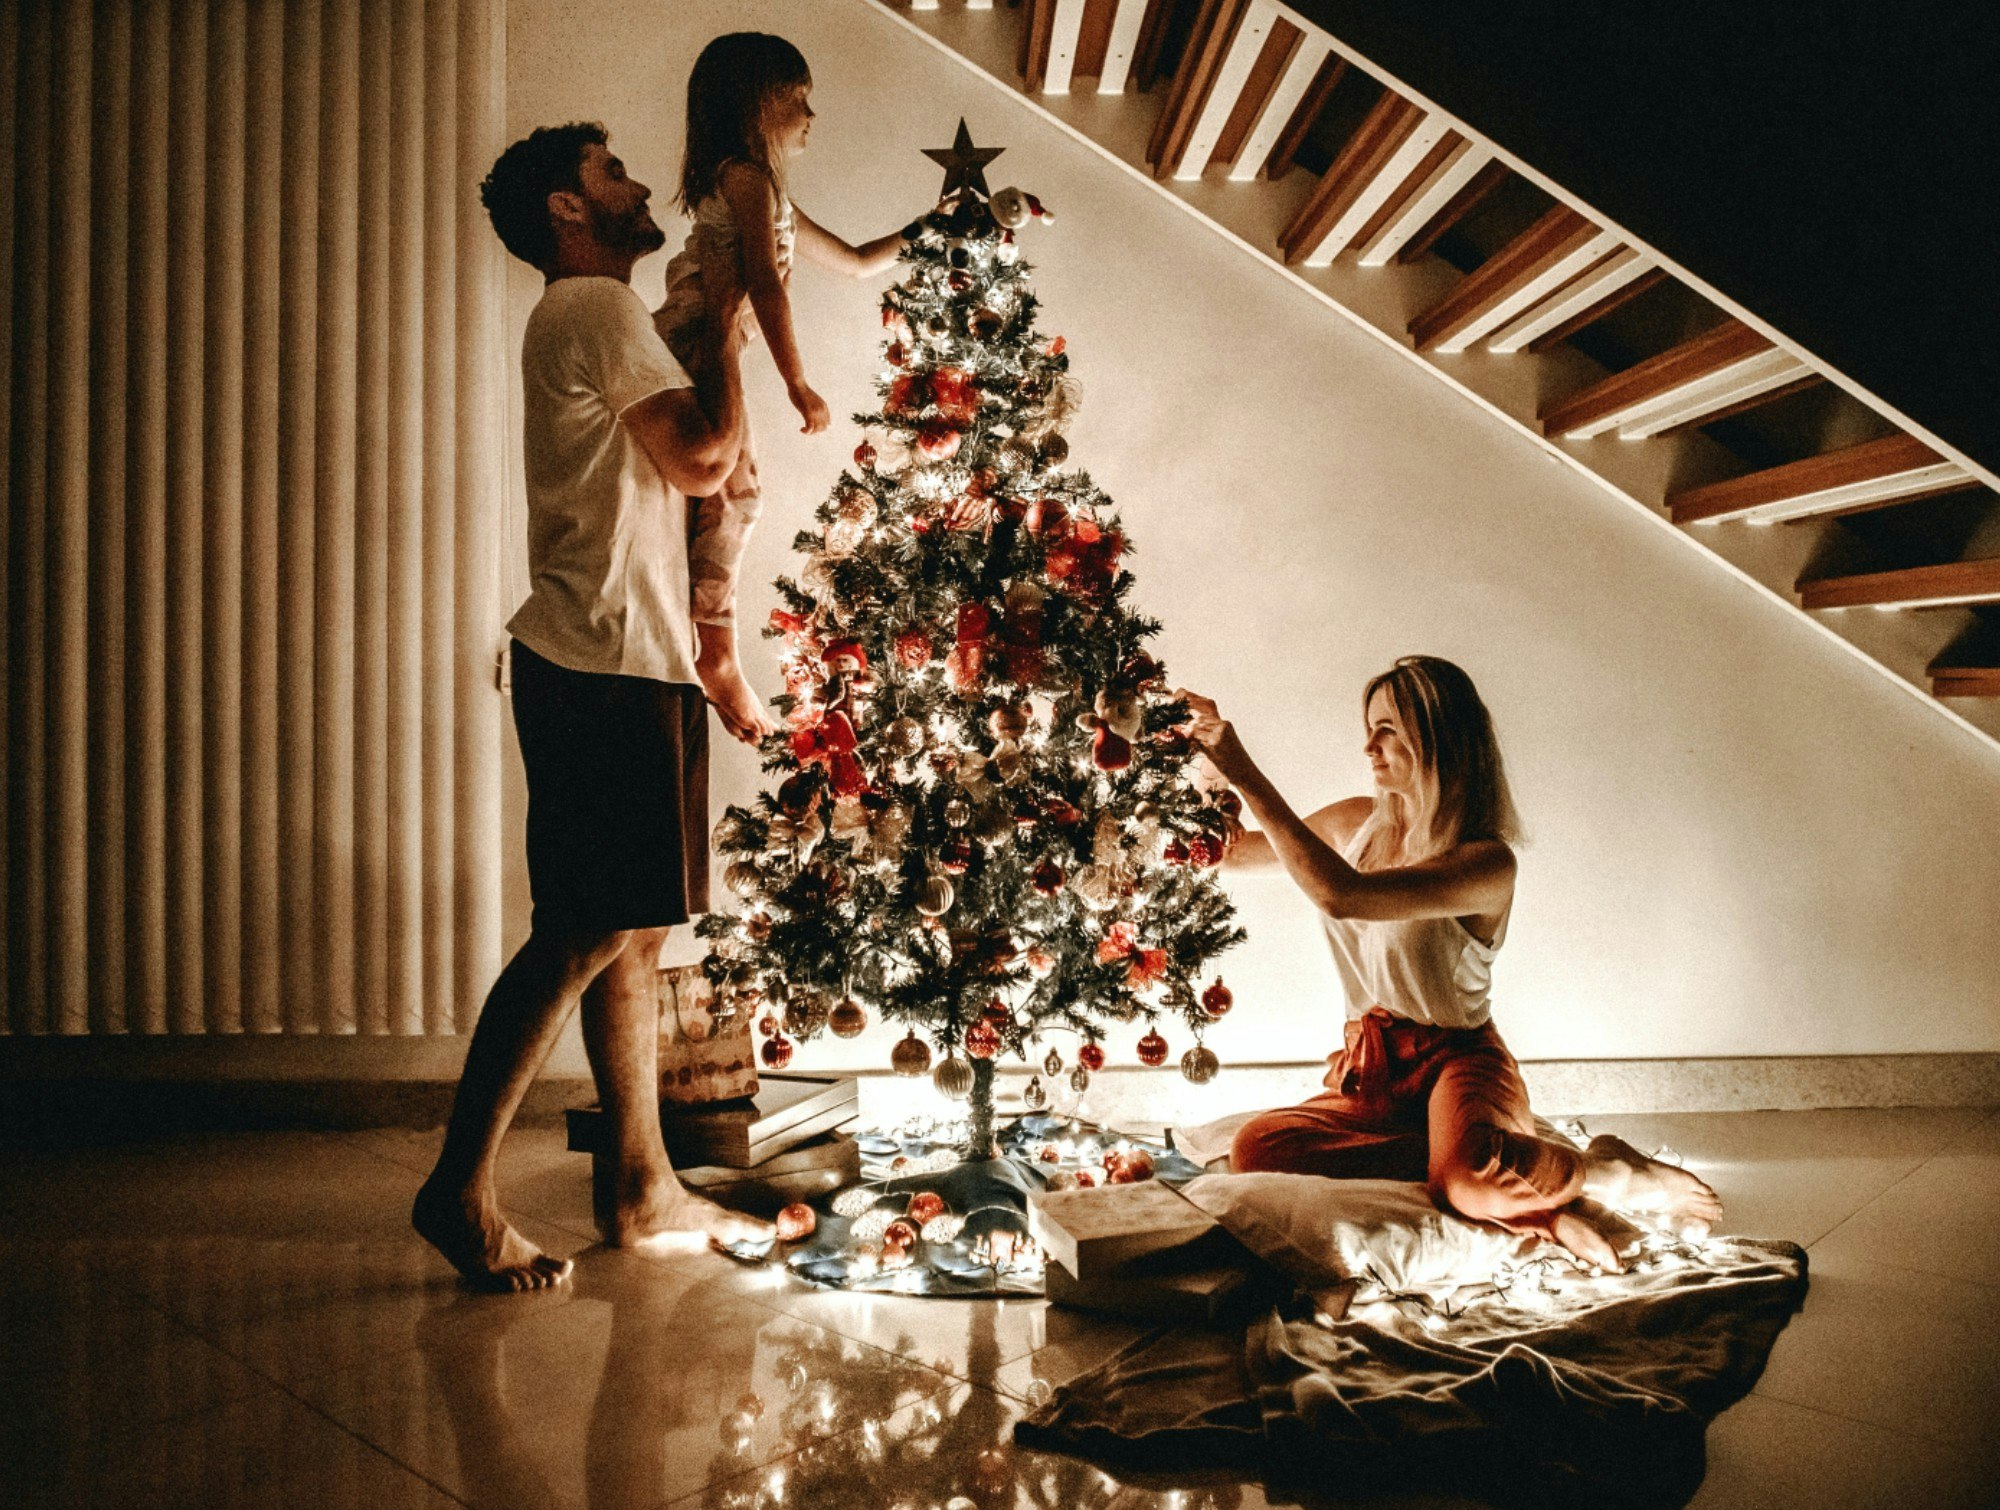 <p>We wish all people with disability and their families a happy holidays. [Source: Unsplash]</p>
